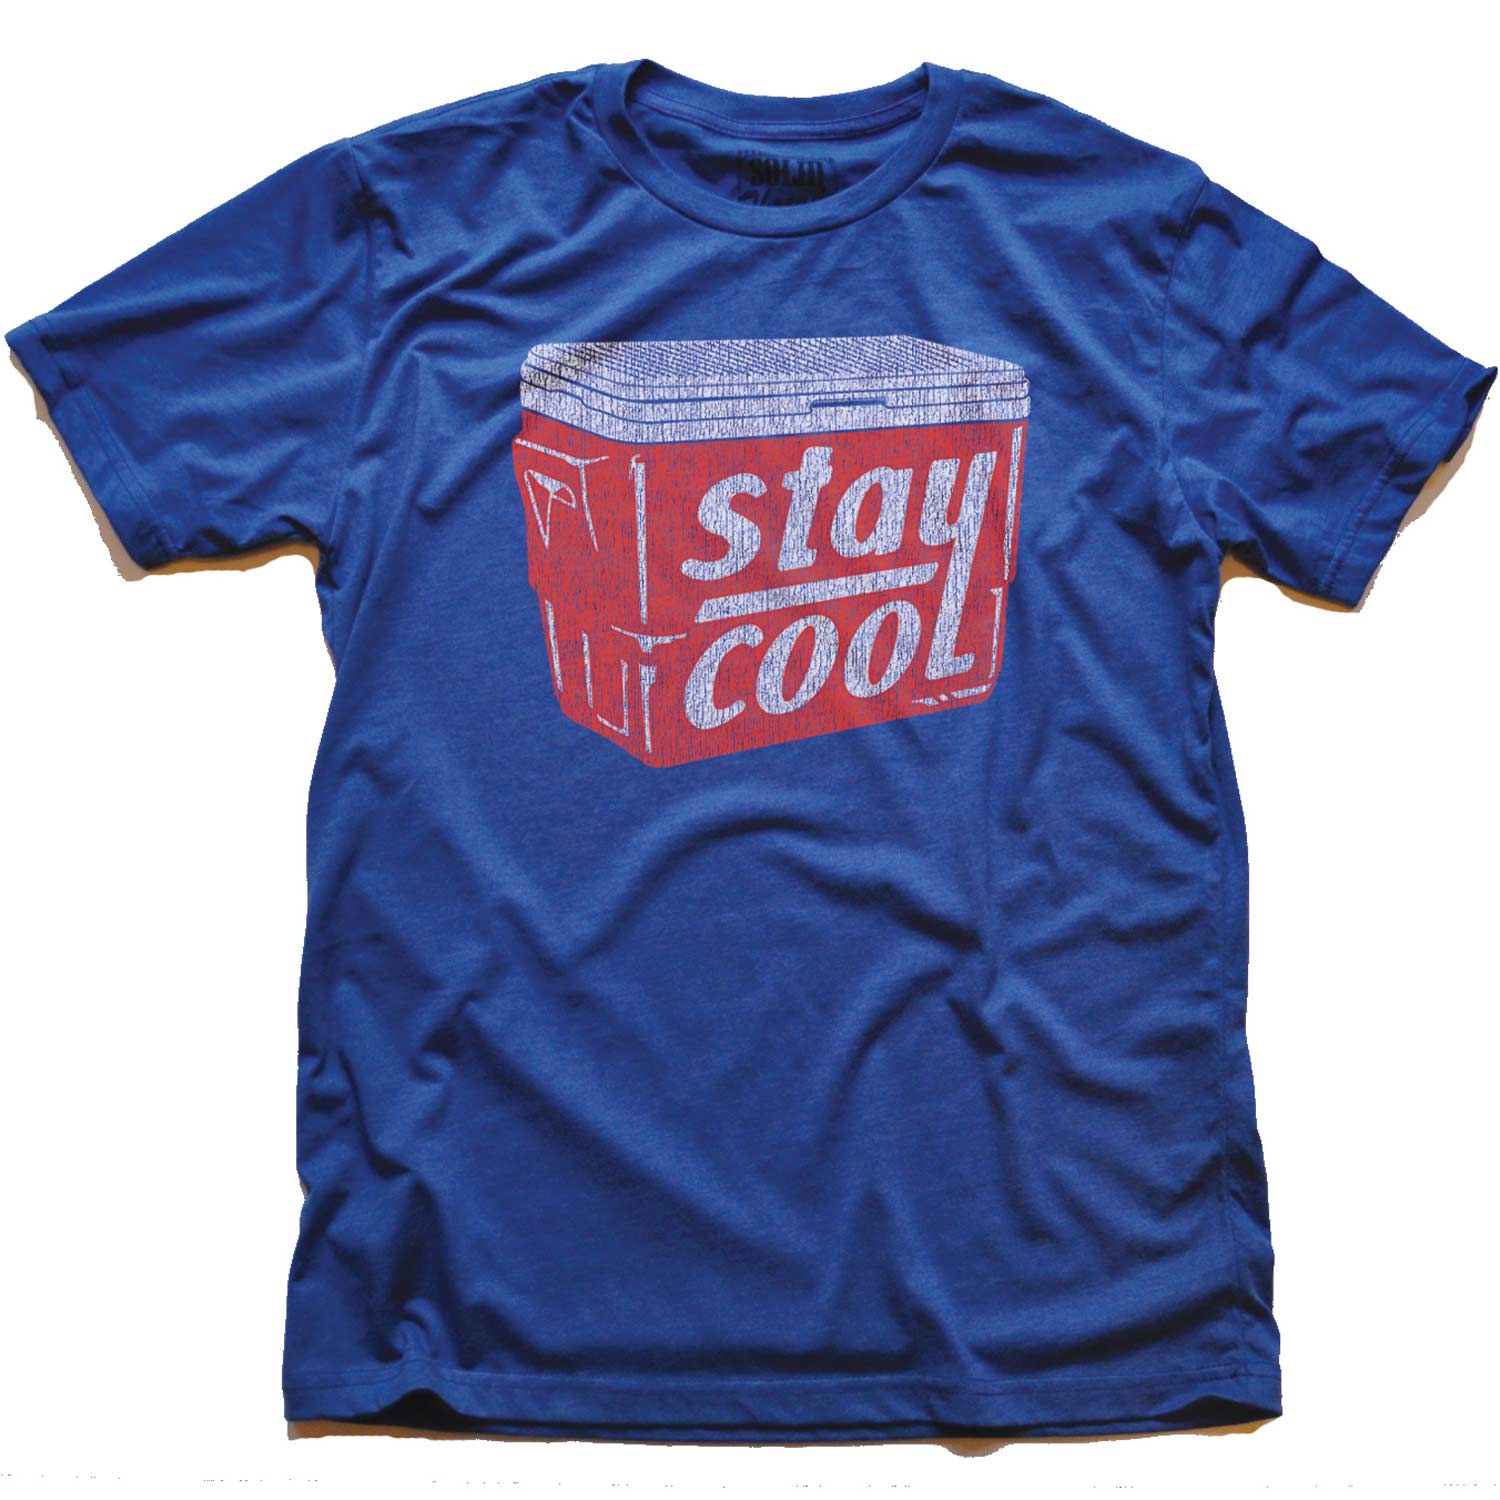 Men's Vintage Stay Cool Ice Box Graphic Tee | Retro Summer Drinking Beers T-shirt | Solid Threads